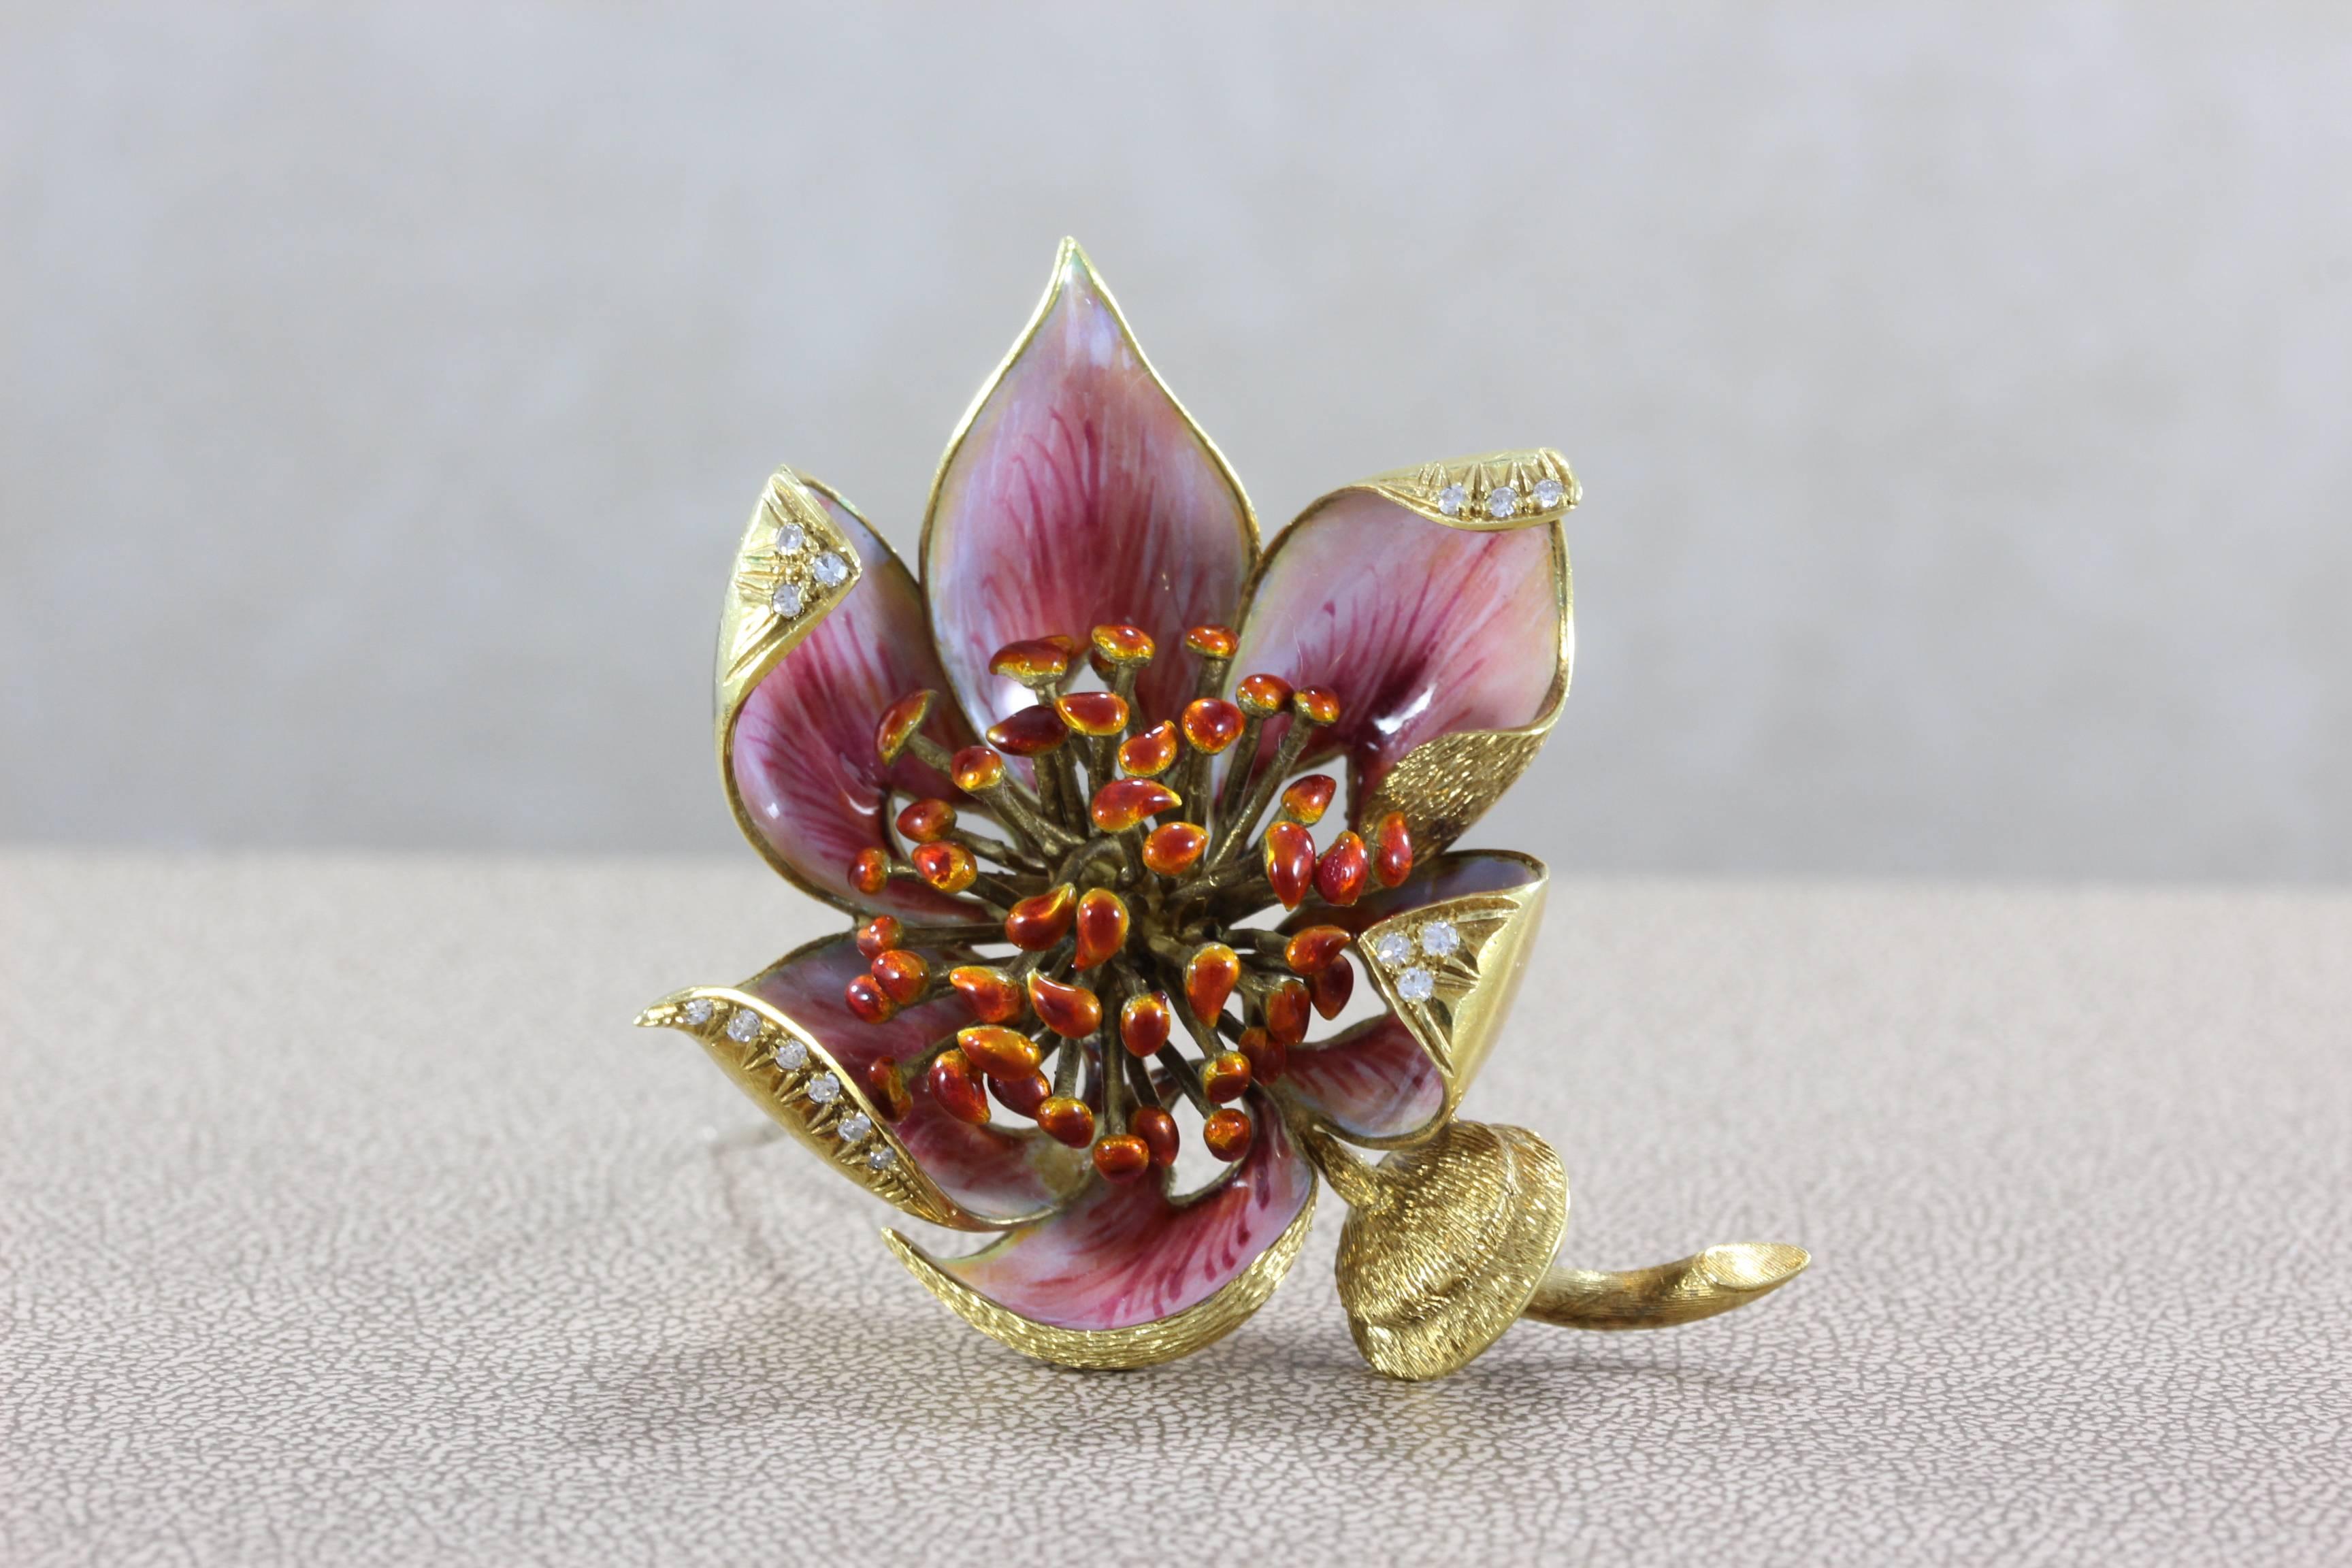 A beautifully made Italian flower brooch with intricate hand painted enamel. Accenting the piece are full-cut diamonds set in 18K yellow gold. Attention to detail is strong in this piece, seen in the enamel painting on the pedals and the gold work